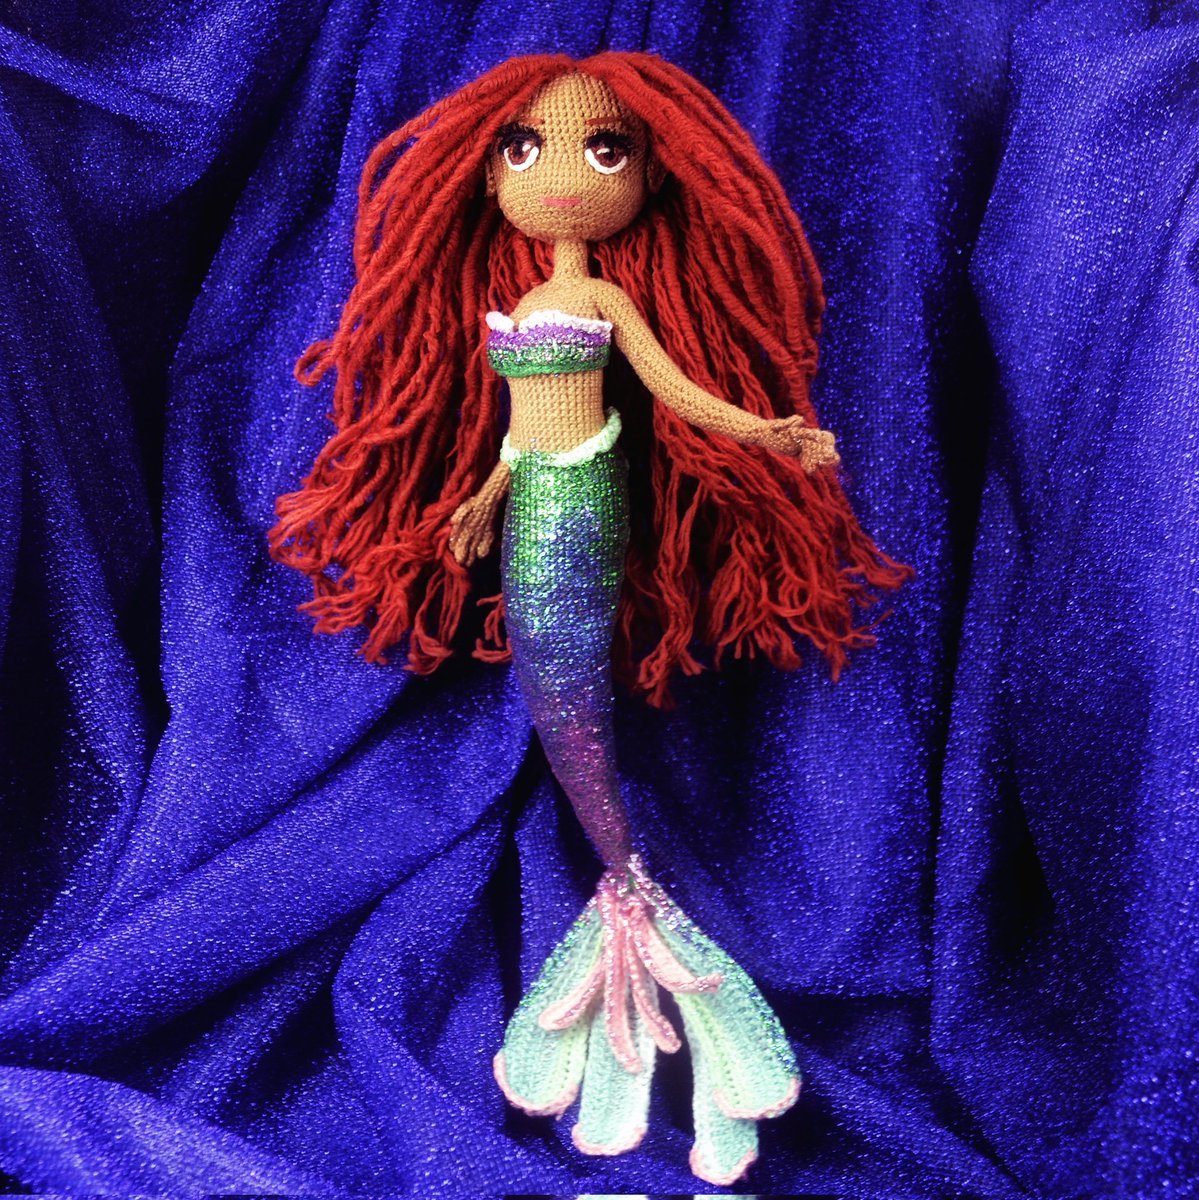 A part of your world 🧜🏾‍♀️🌊✨ My very first crochet mermaid, as inspired by the live remake of The Little Mermaid, starring the beautiful and talented @HalleBailey 😍💕 I'm in love with the ginger locs and obsessed with her glittery tail! All handmade with love 🫶